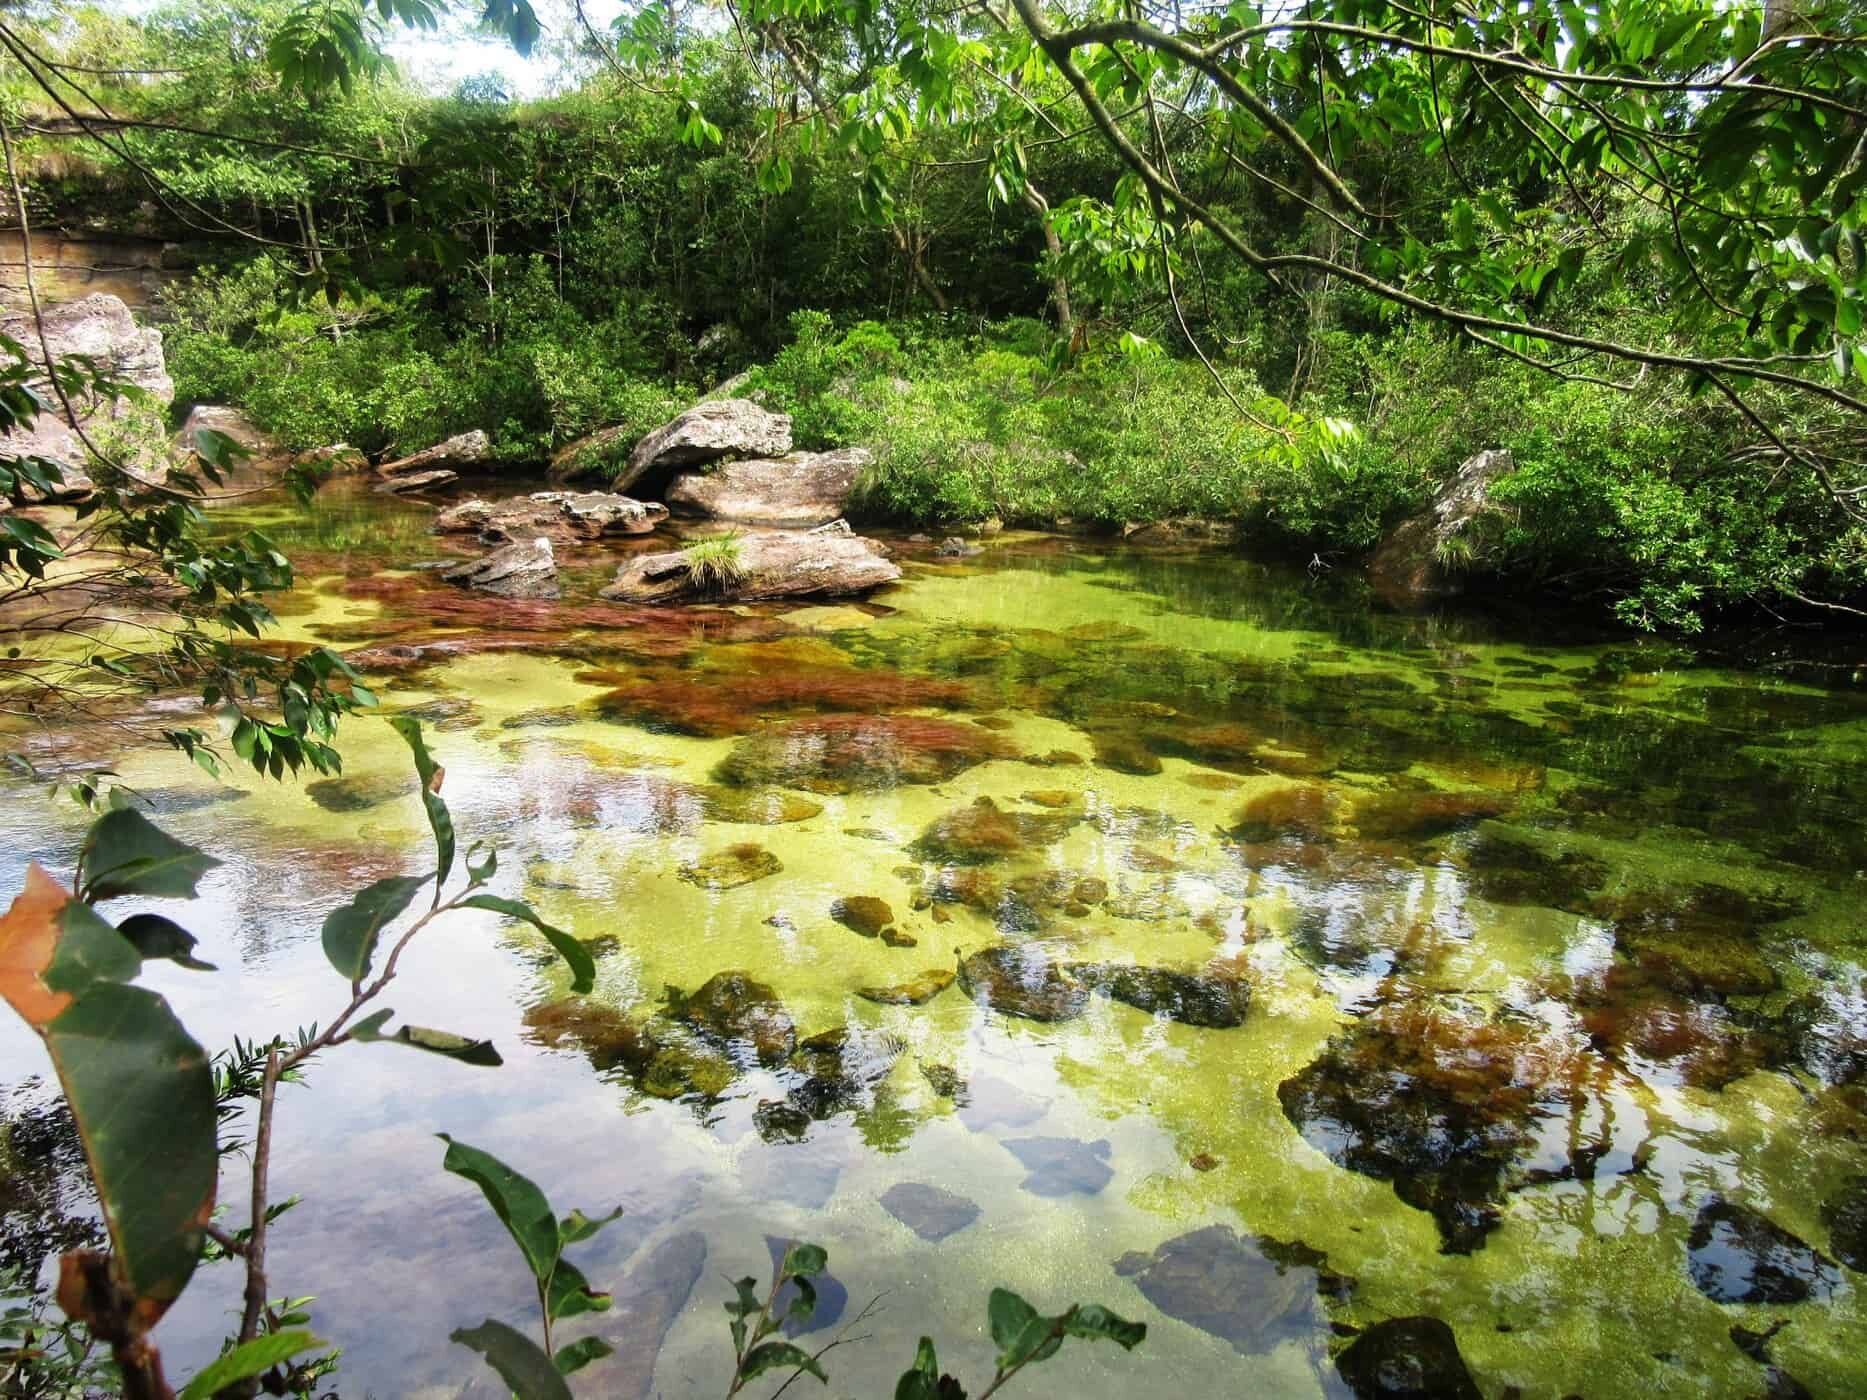 Caño Cristales, The Liquid Rainbow in Colombia - information from SouthAmericanBackpacker.com